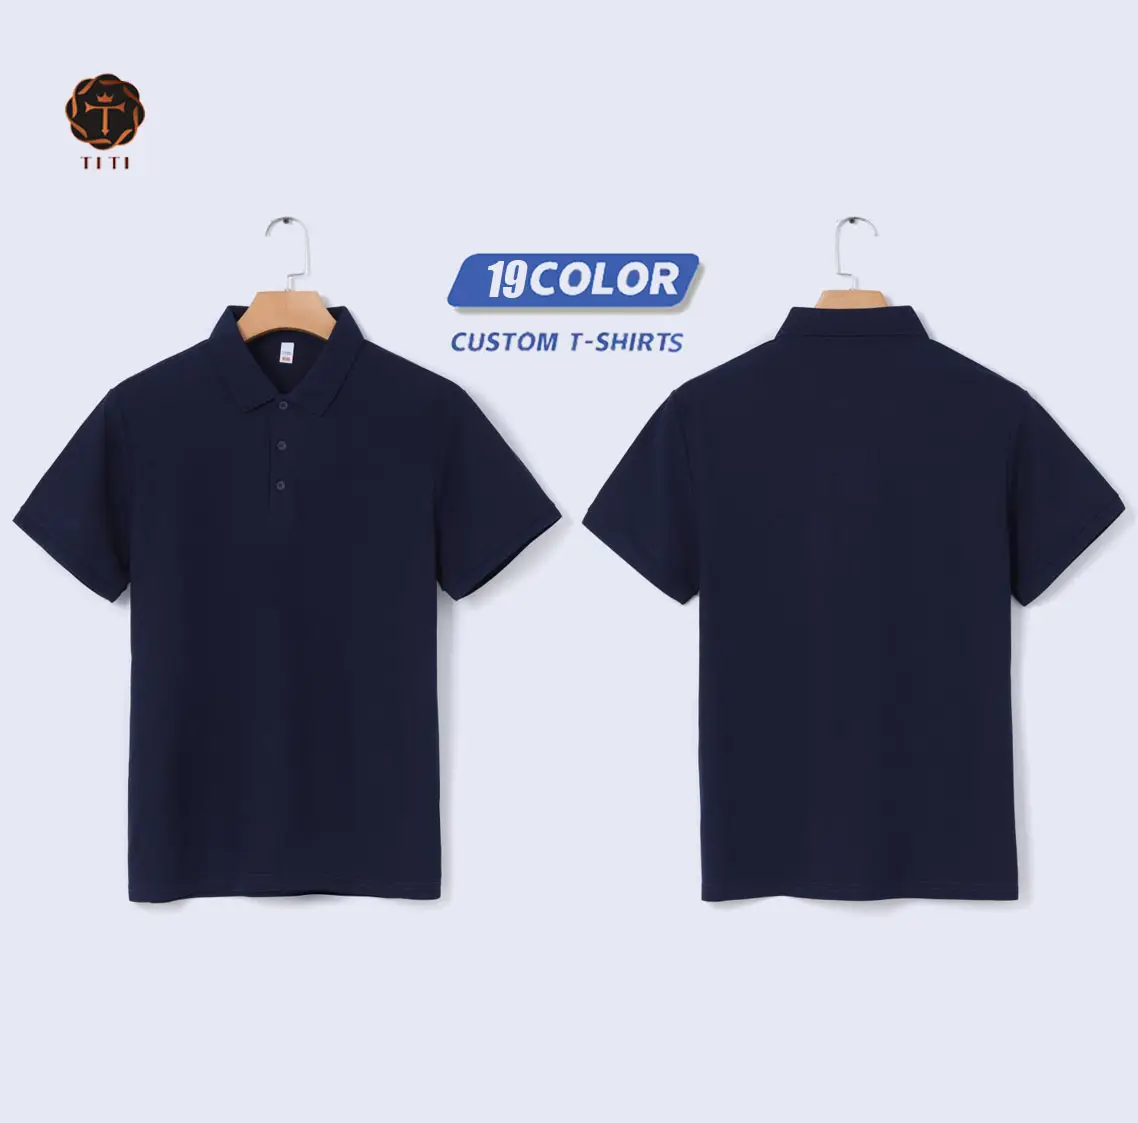 TITI Wholesale Blank Customized Embroidered Logo Men's T-shirt High Quality Cotton Work Clothes Uniform Custom Men's Polo Shirts